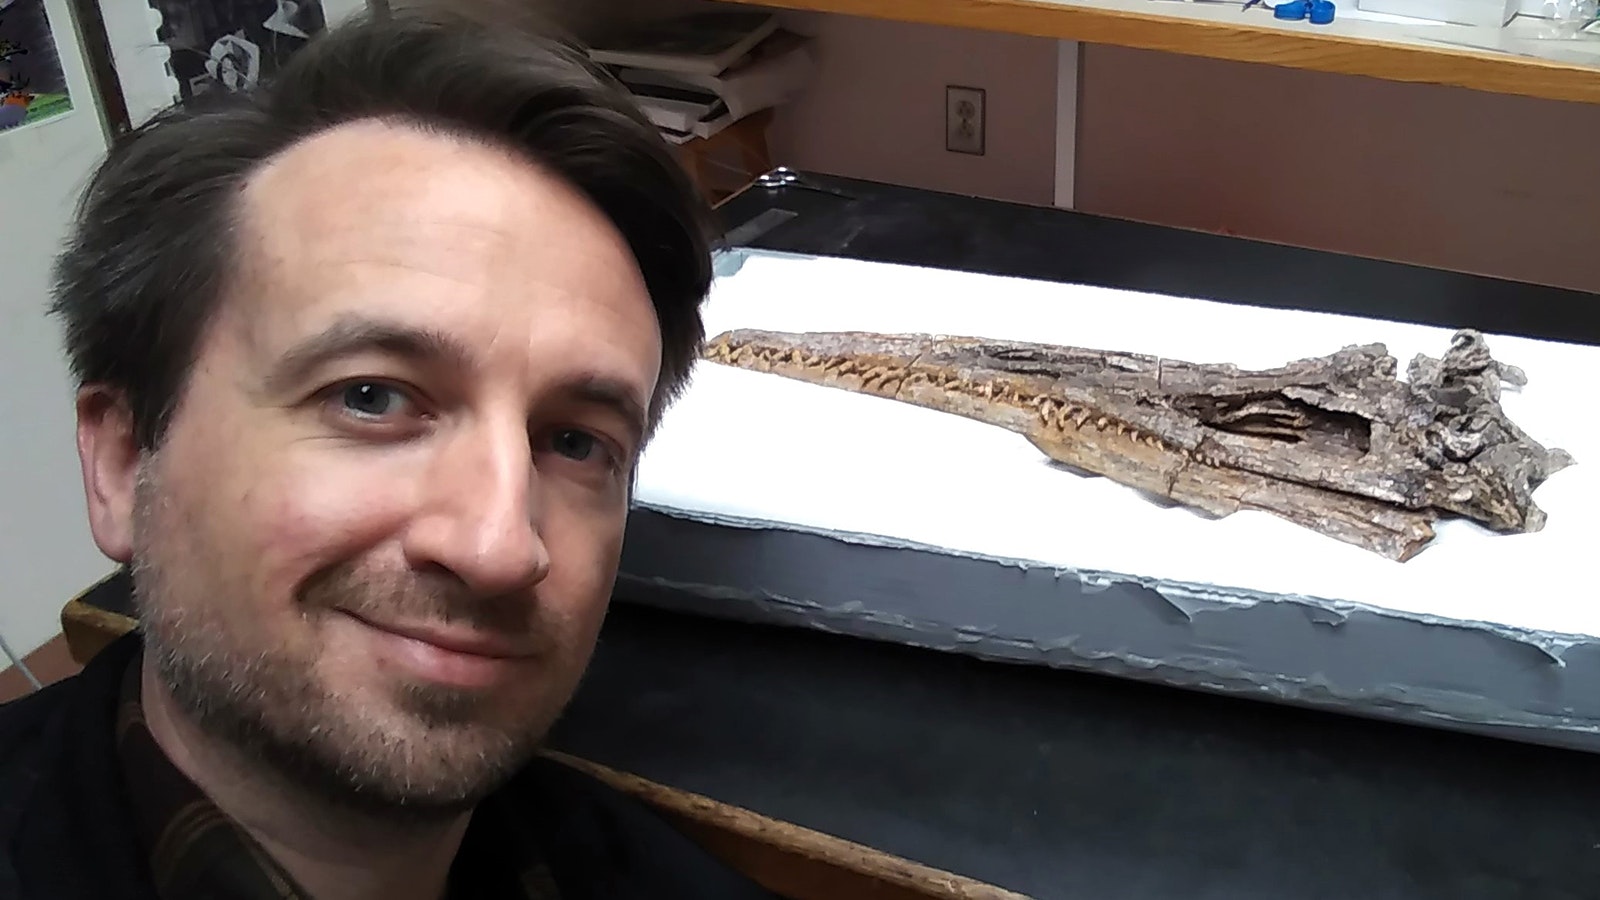 Robert Clark with the Department of Biological Resources at Marshall University in West Virginia poses with the skull of Unktaheela, the newest type of prehistoric marine reptile identified from the Late Cretaceous rocks of Wyoming. It's unique because of its small size and big eyes.